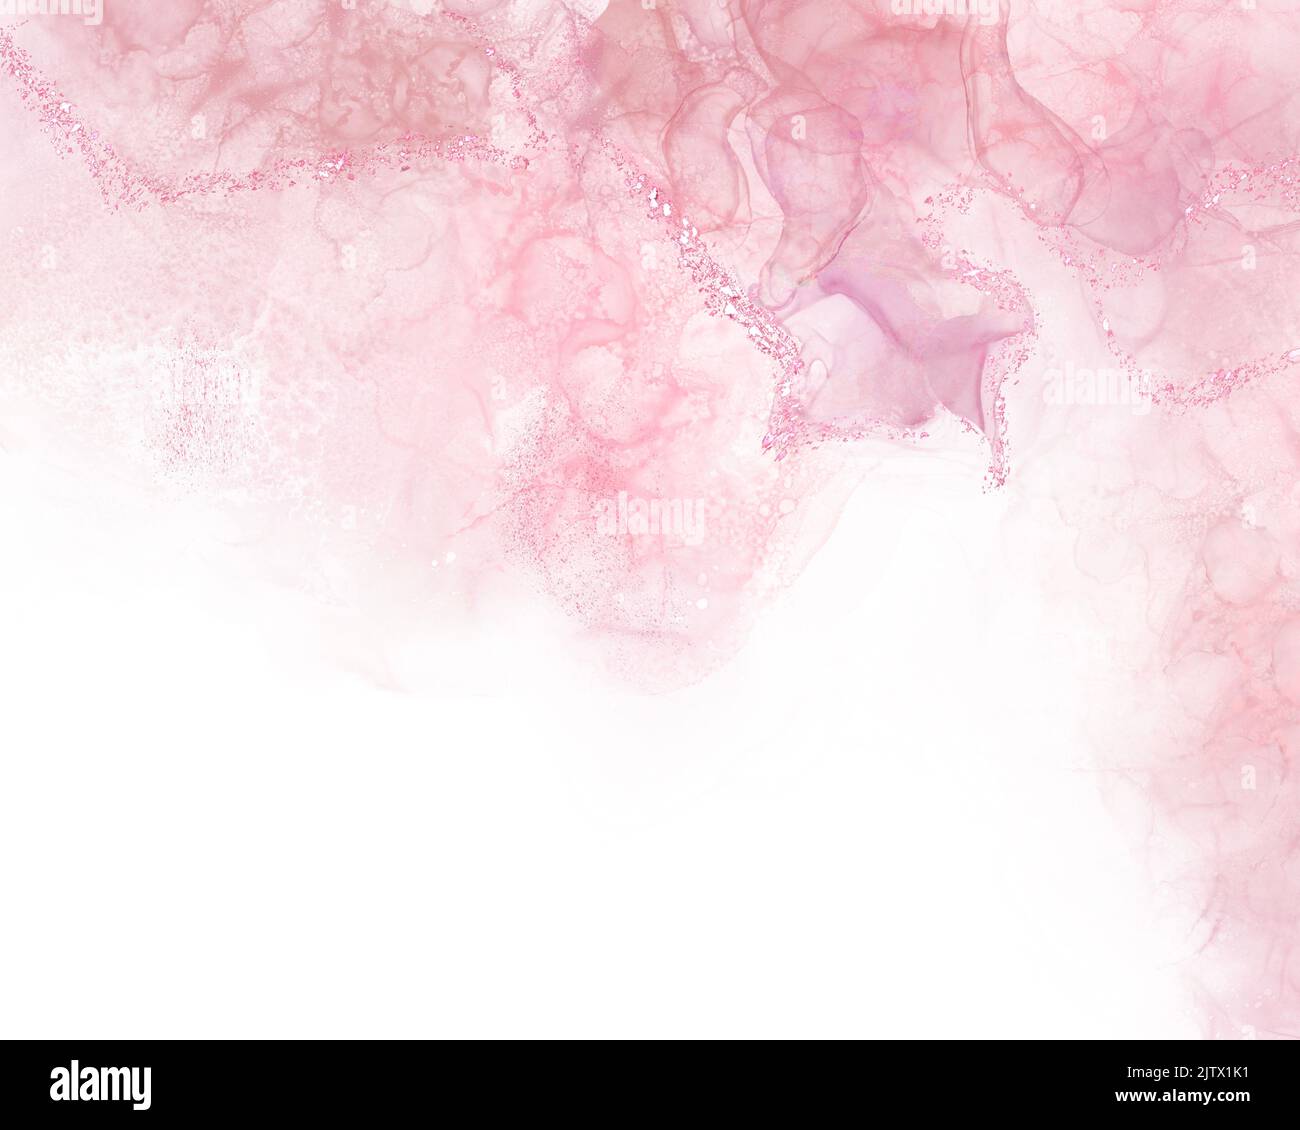 Abstract pink flower art painting background alcohol ink technique Stock Photo